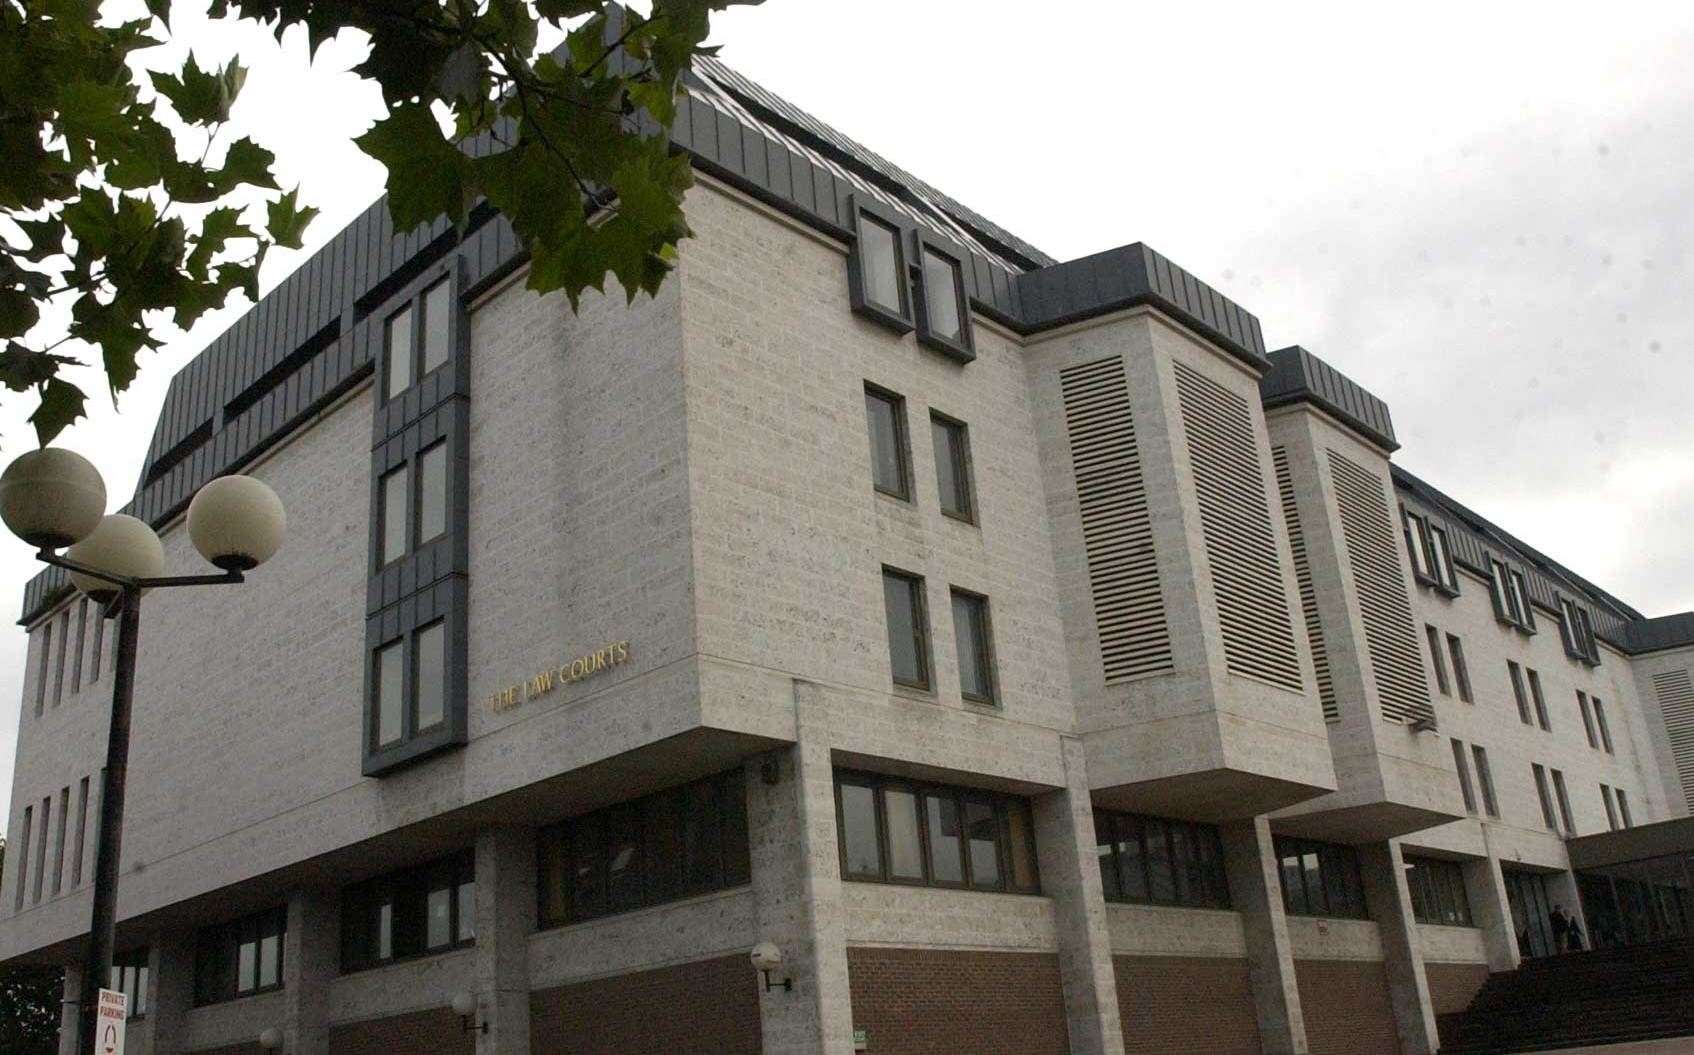 Maidstone Crown Court, where the trial is taking place